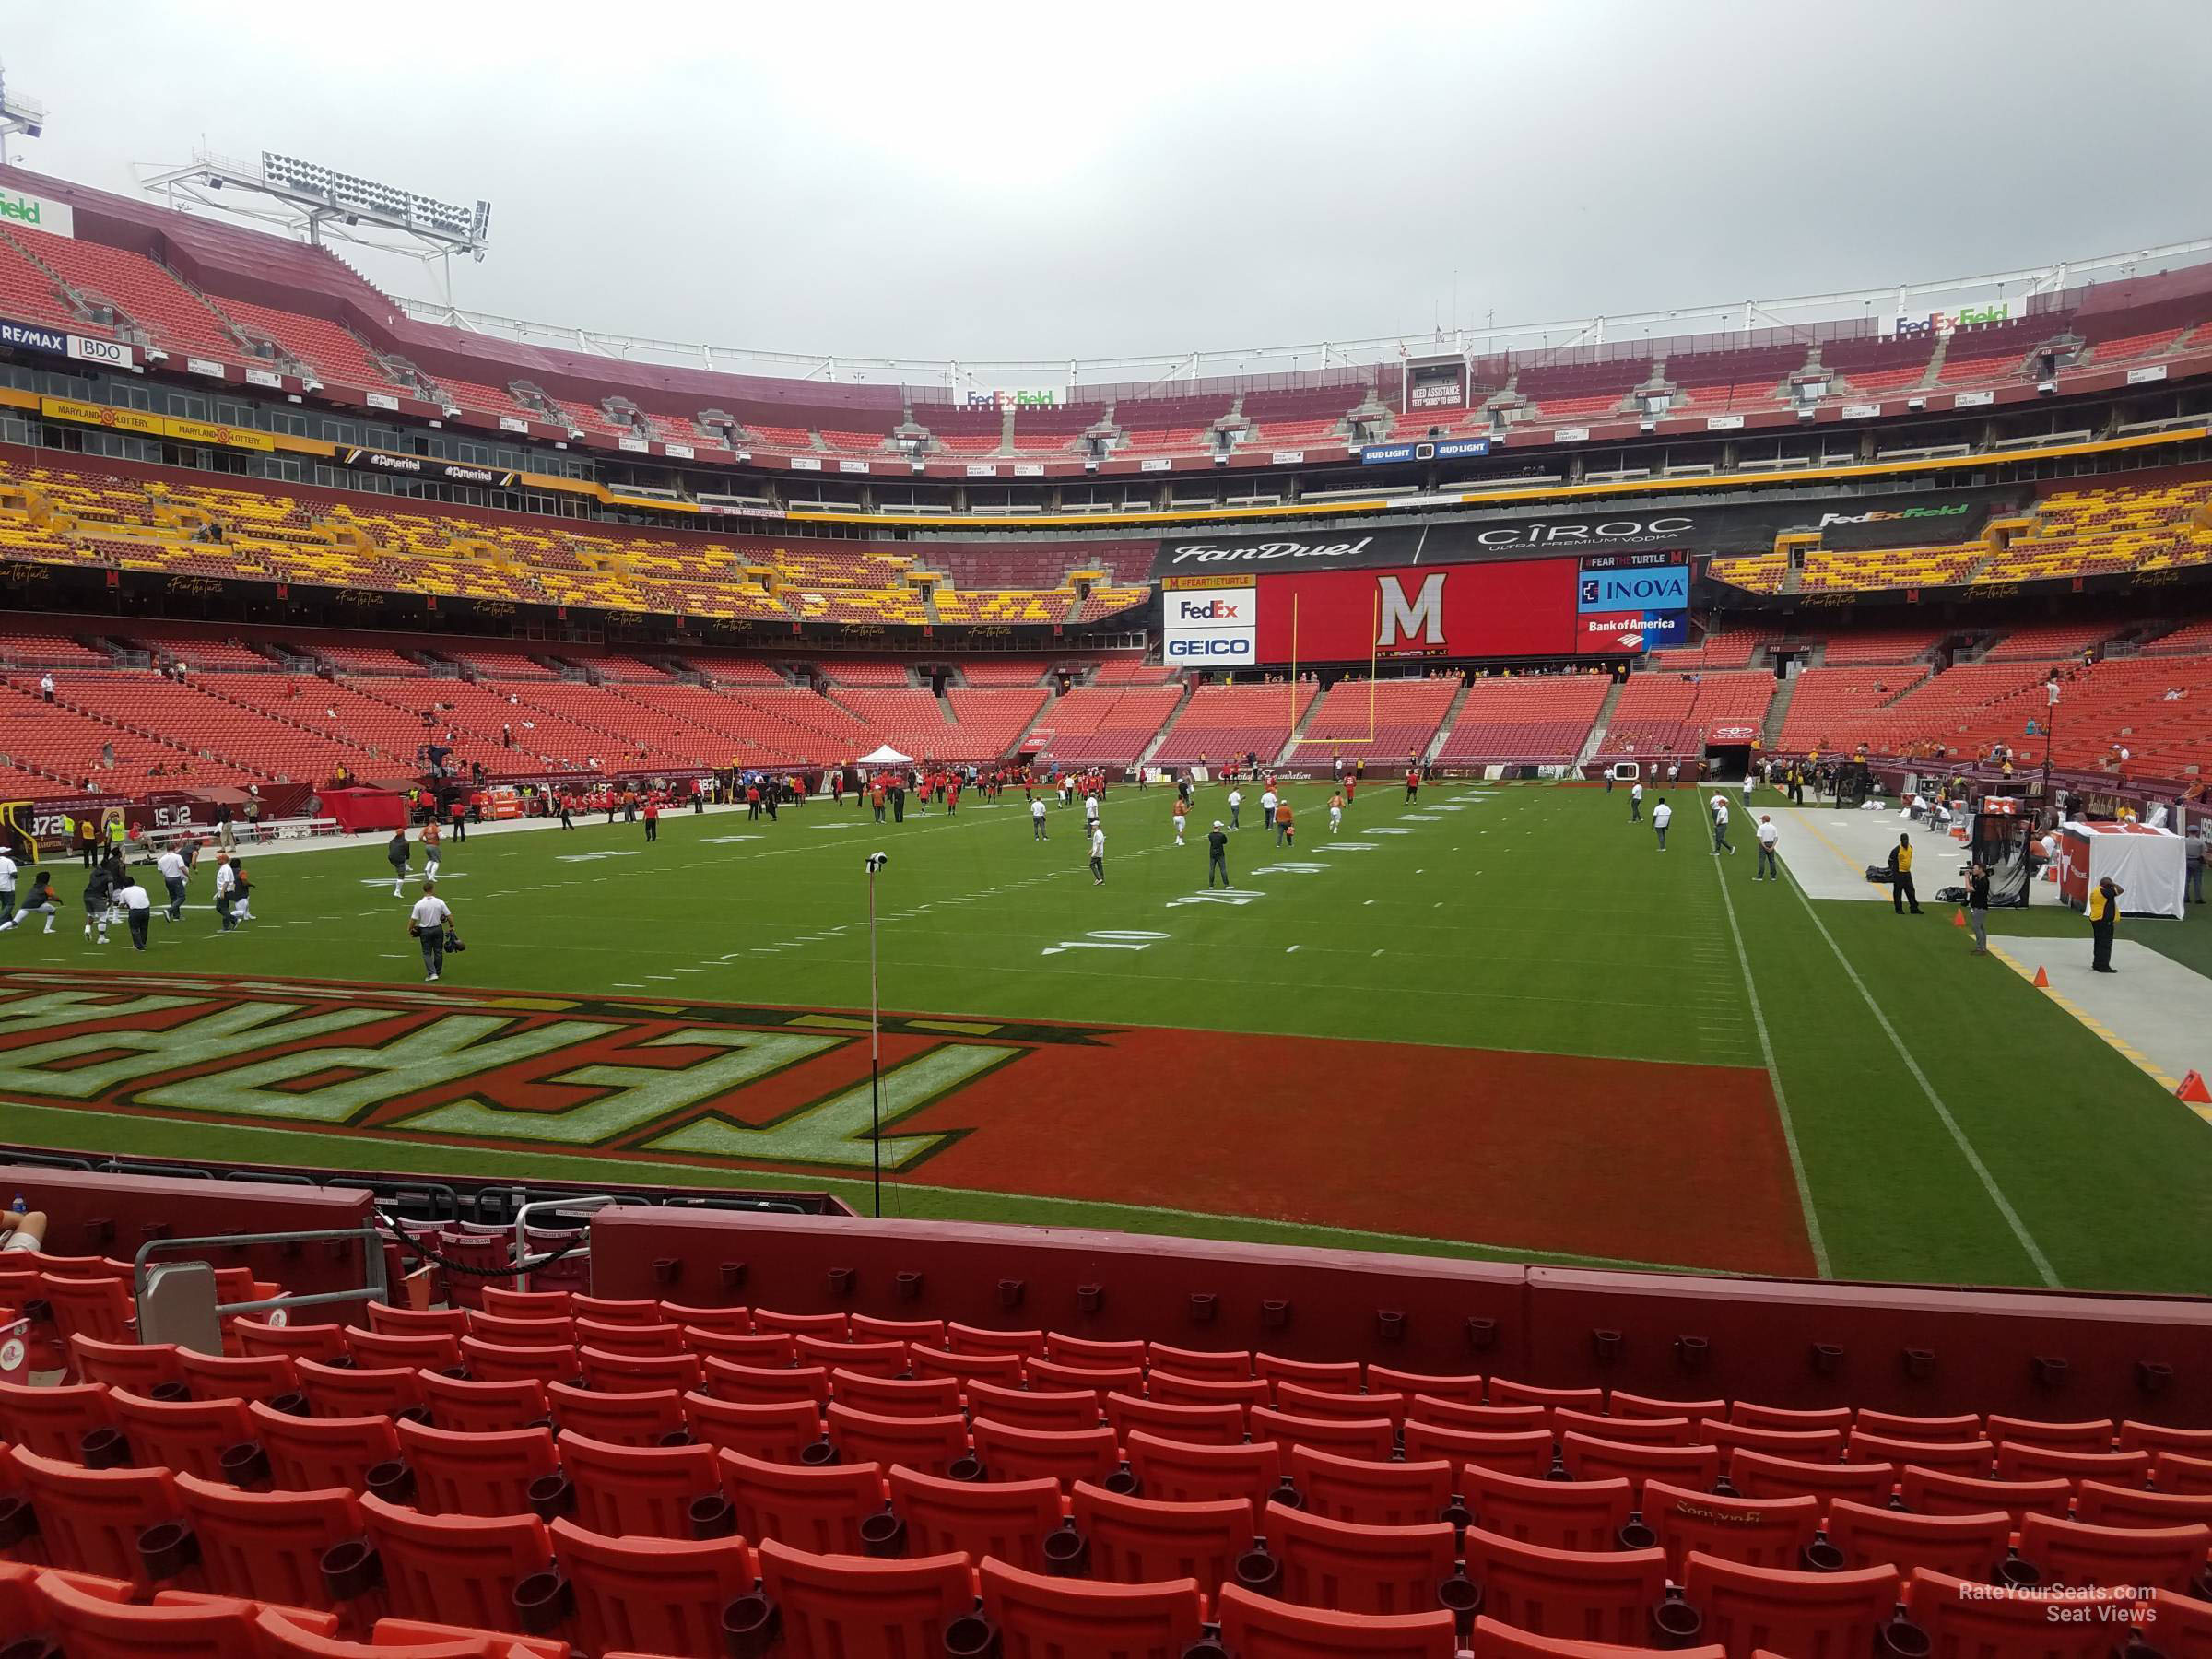 section 130, row 13 seat view  - fedexfield